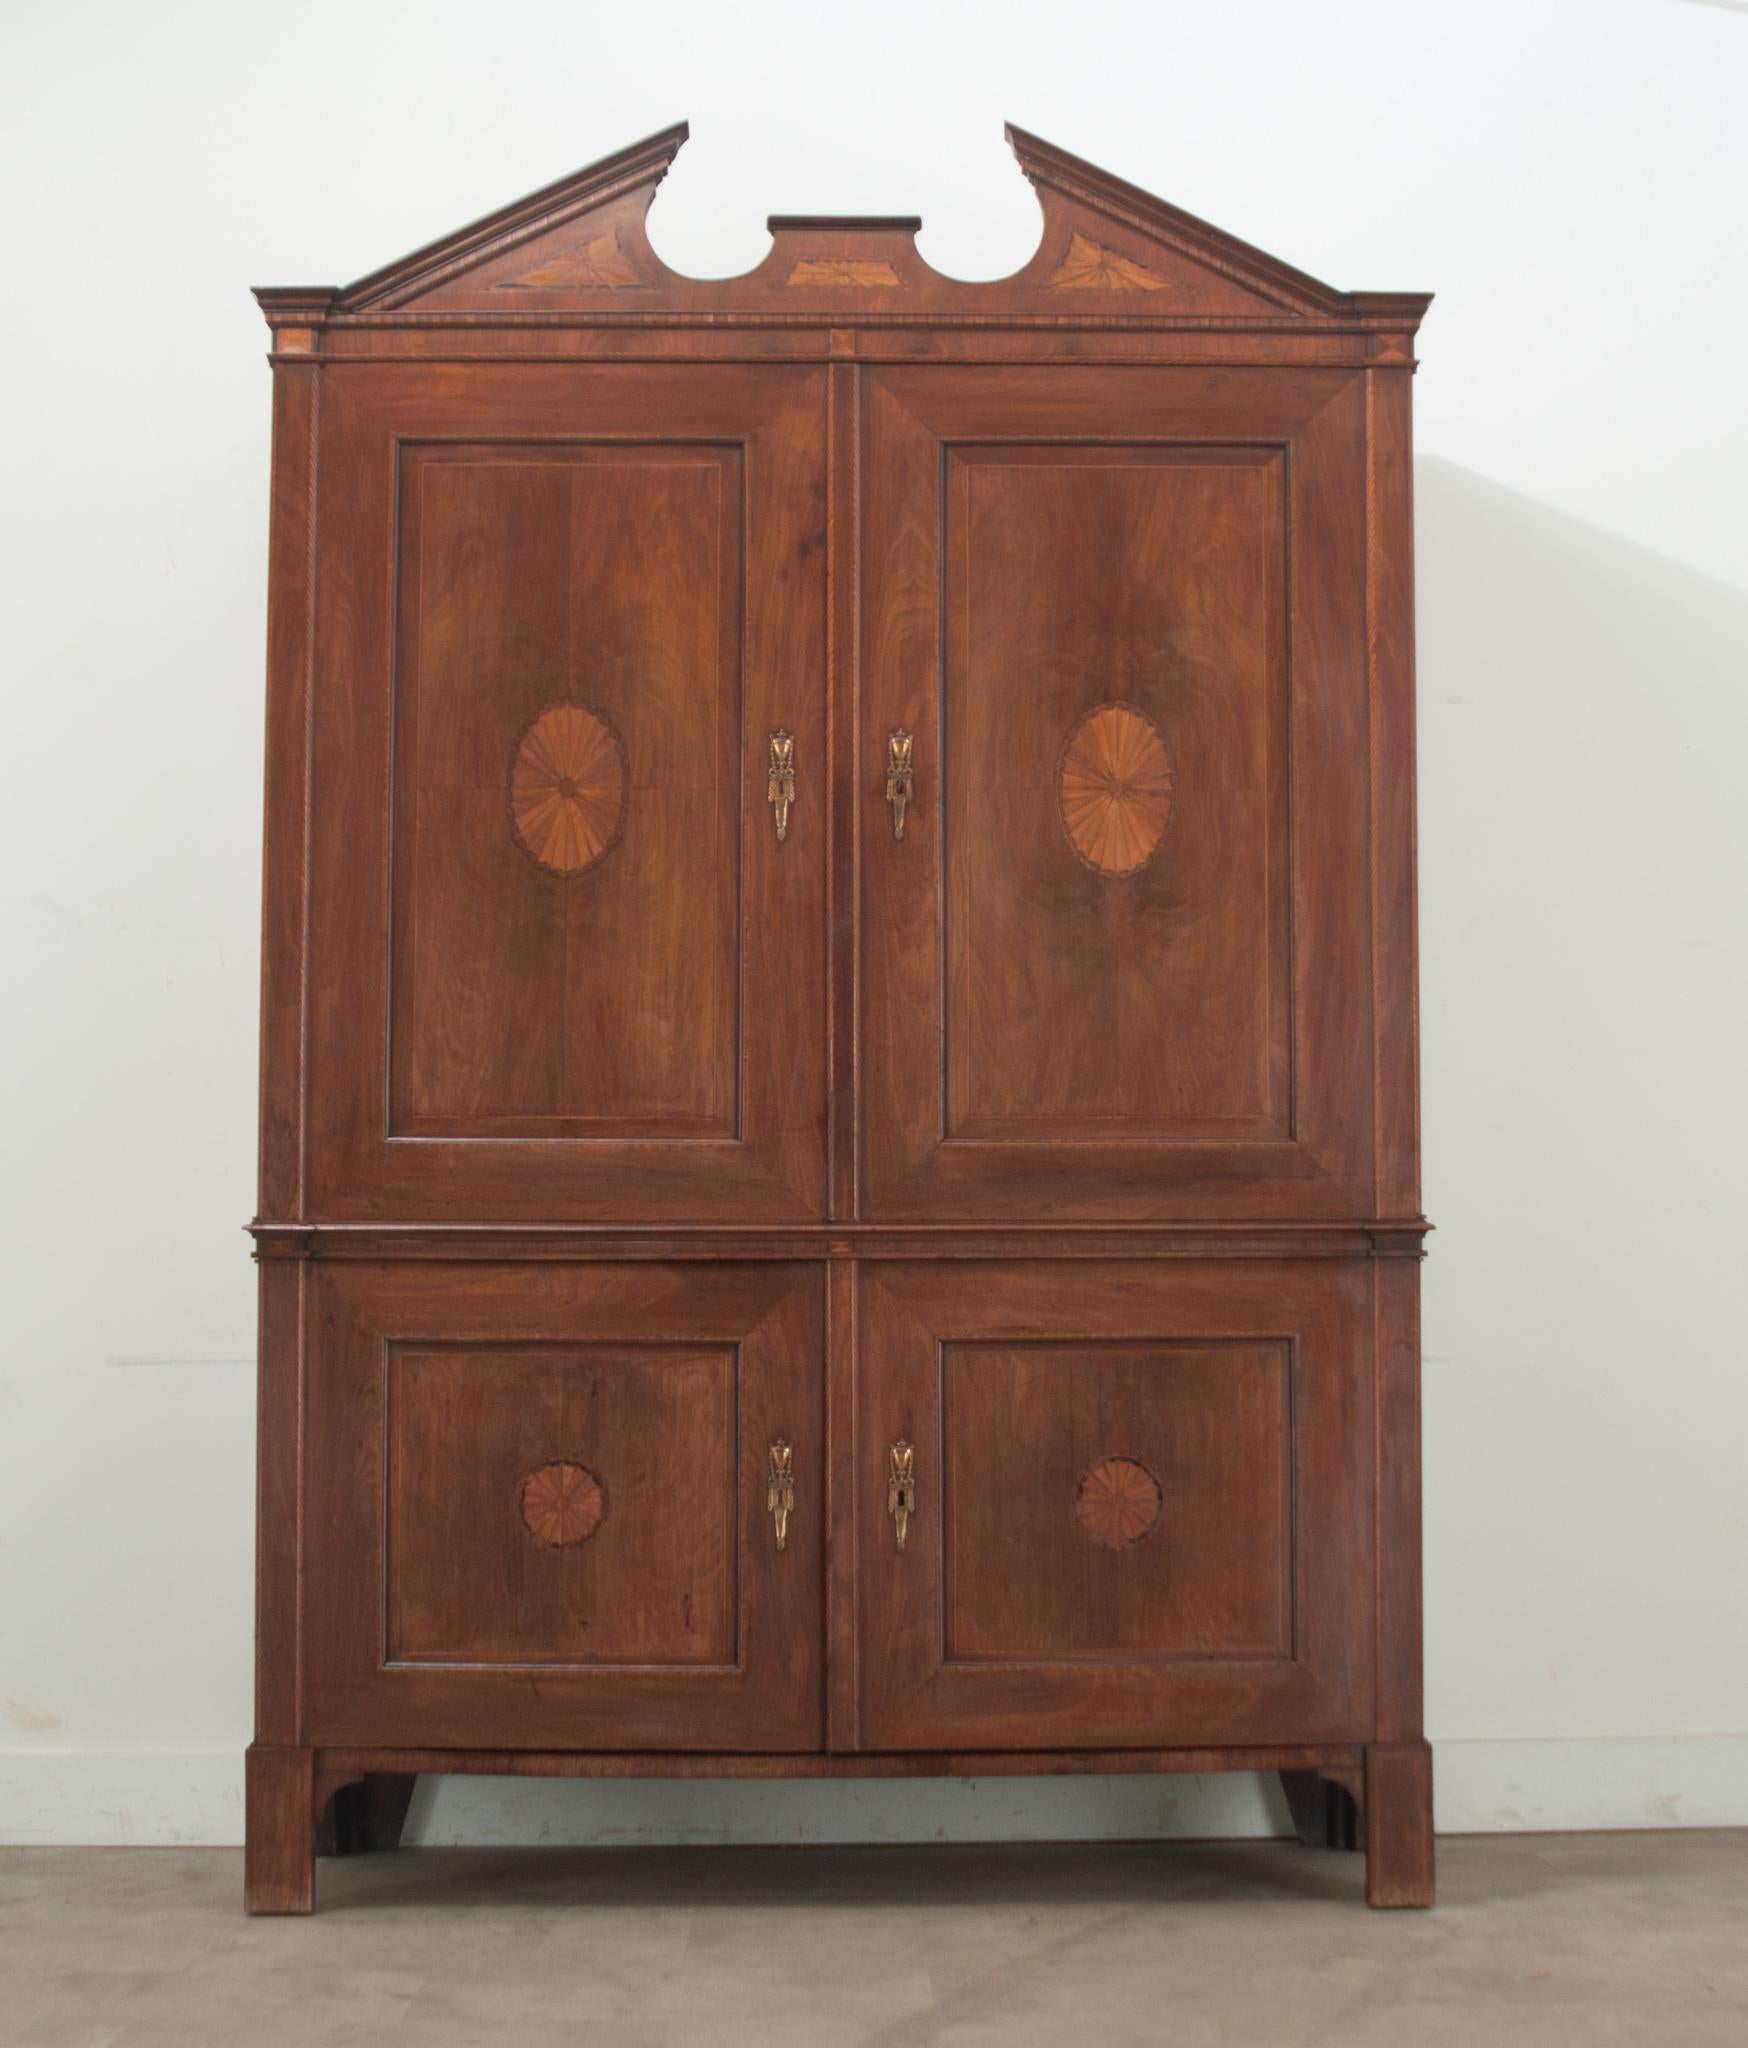 A mahogany Louis XVI period linen press made in the Netherlands. The top of this case piece has a broken pediment design over large bookmatched and paneled doors that open to reveal three fixed shelves, one at 9 ½” deep and two at 20 ½” deep, and 3